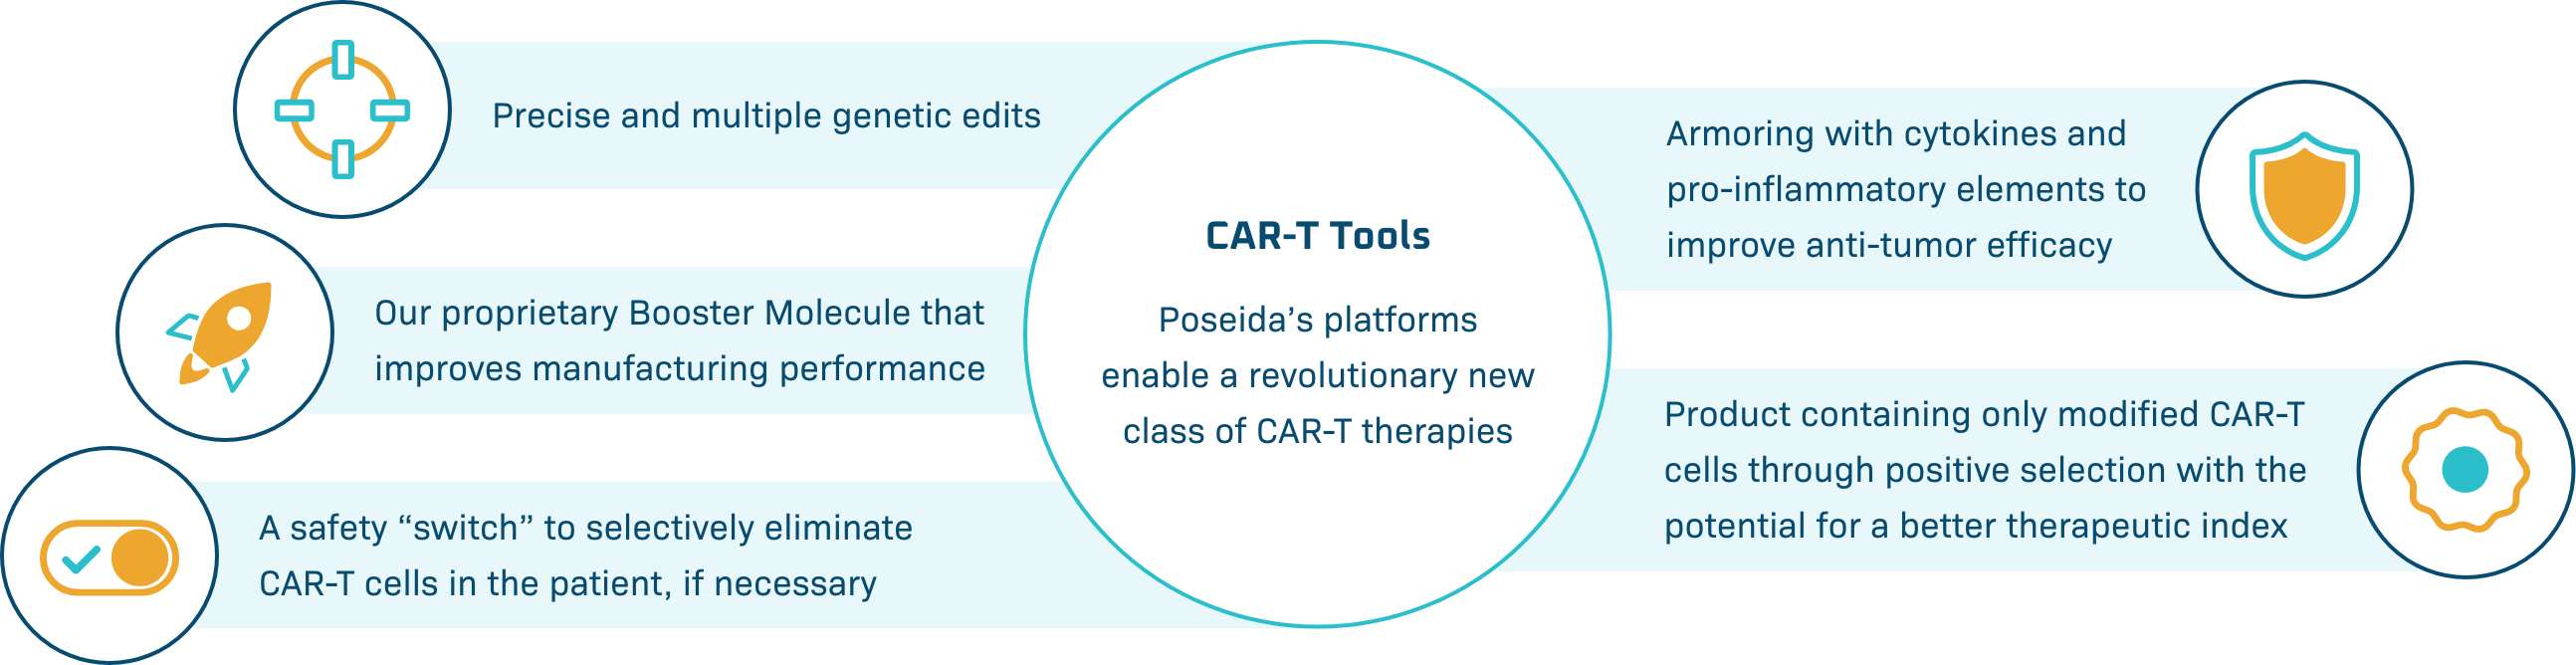 Poseida's platforms enable a revolutionary new class of CAR-T therapies, showcased by a target icon for precise and multiple genetic edits, a rocket ship icon for our proprietary Booster Molecule that improves manufacturing performance, a toggle icon for our safety switch technology to selectively eliminate CAR-T cells in the patient if necessary, a shield for armoring with cytokines and pro-inflammatory elements to improve efficacy, and a cell icon for a final product containing only modified CAR-T cells.